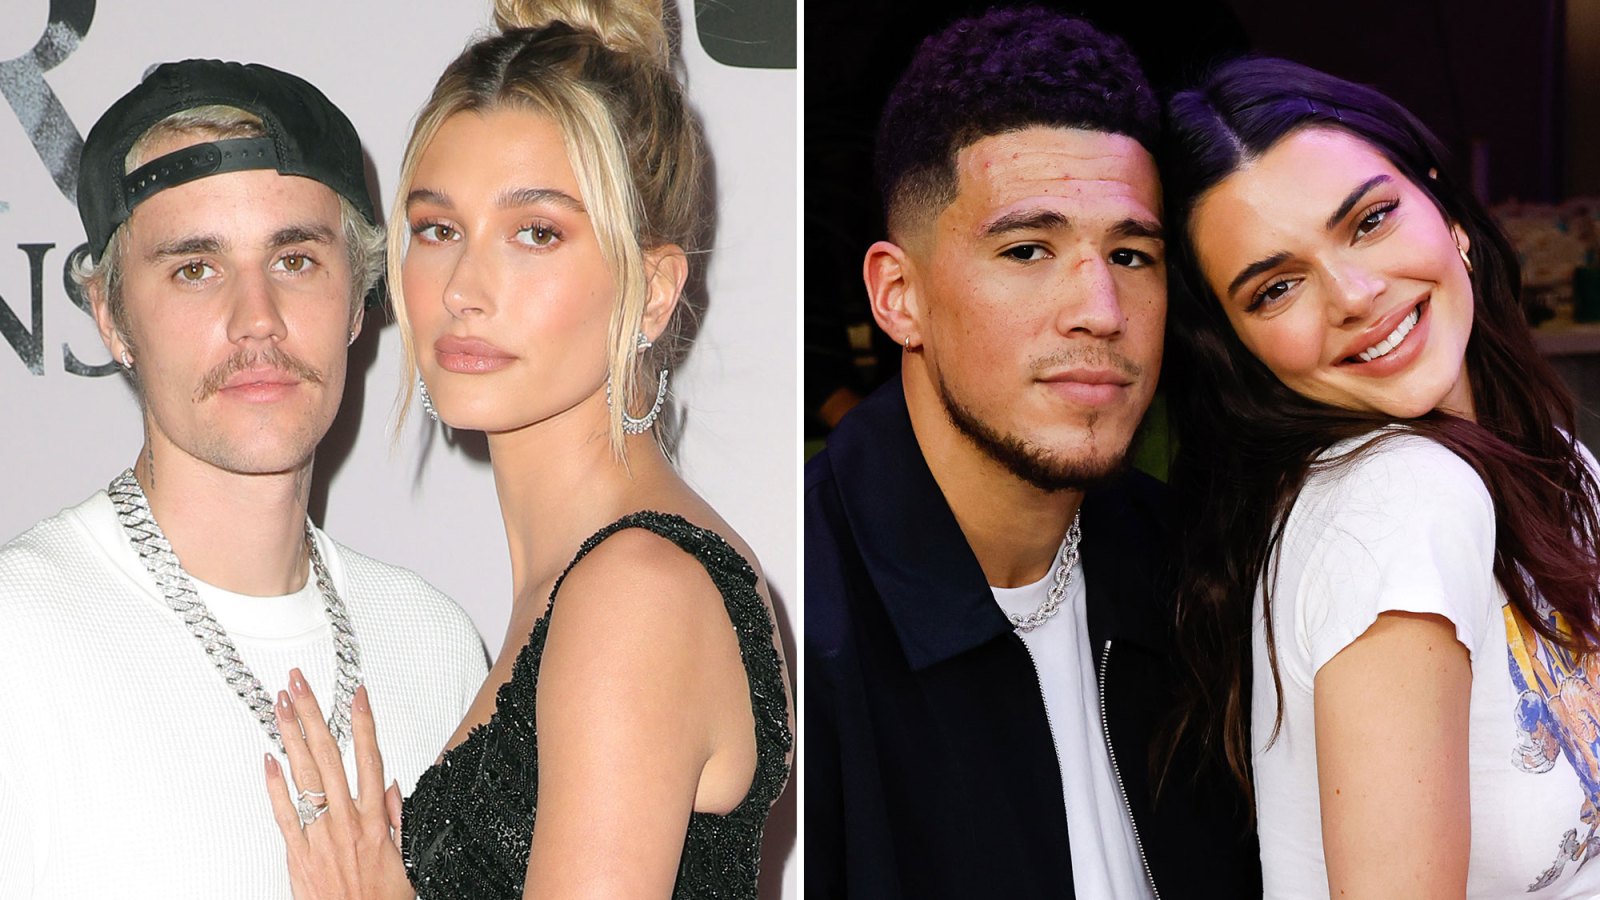 Justin Bieber and Hailey Baldwin Double Date With Kendall Jenner and Devin Booker a Week After Haileys Hospitalization